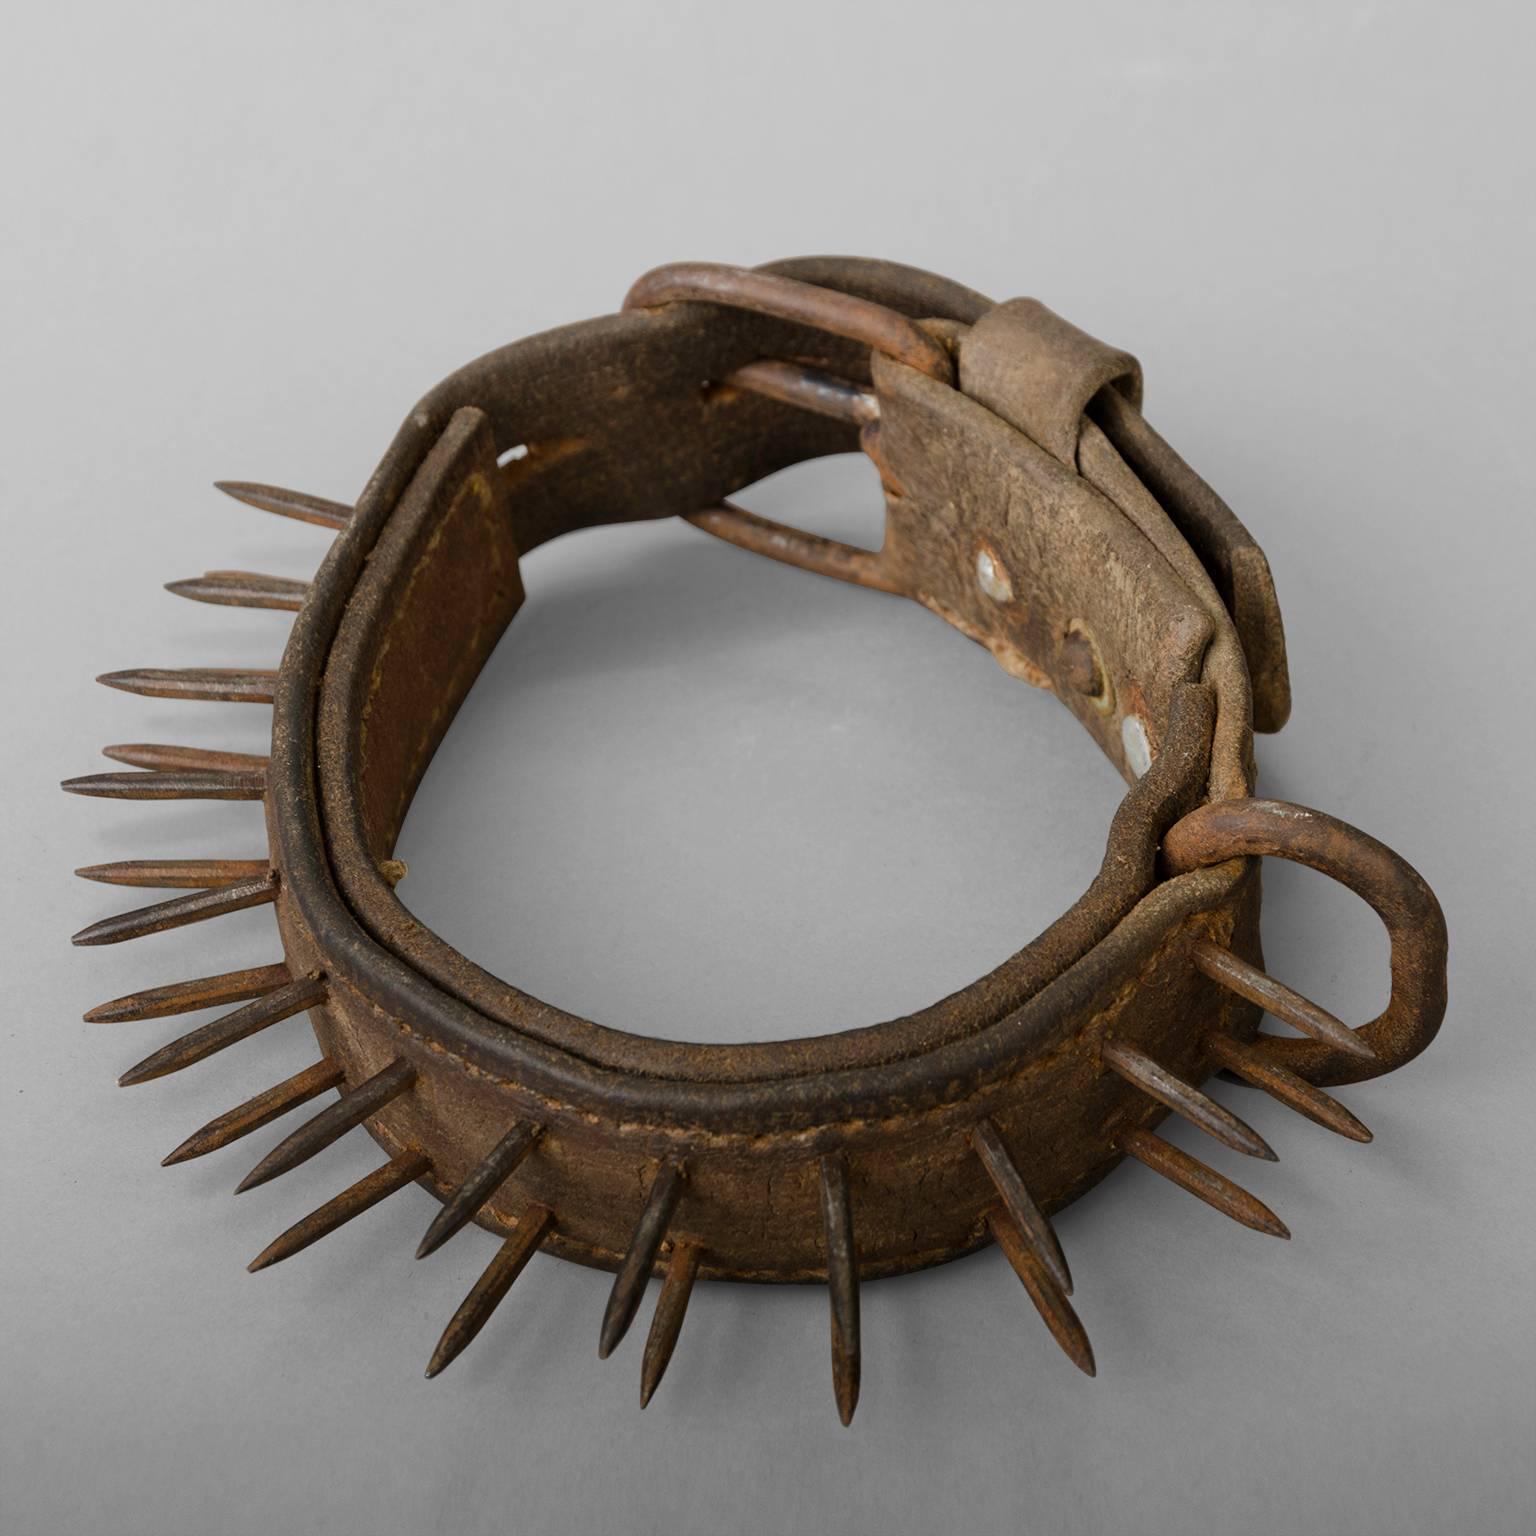 These collars were for sheepdogs to protect them from wolves attacks, leather and wrought iron spikes. circa 1880